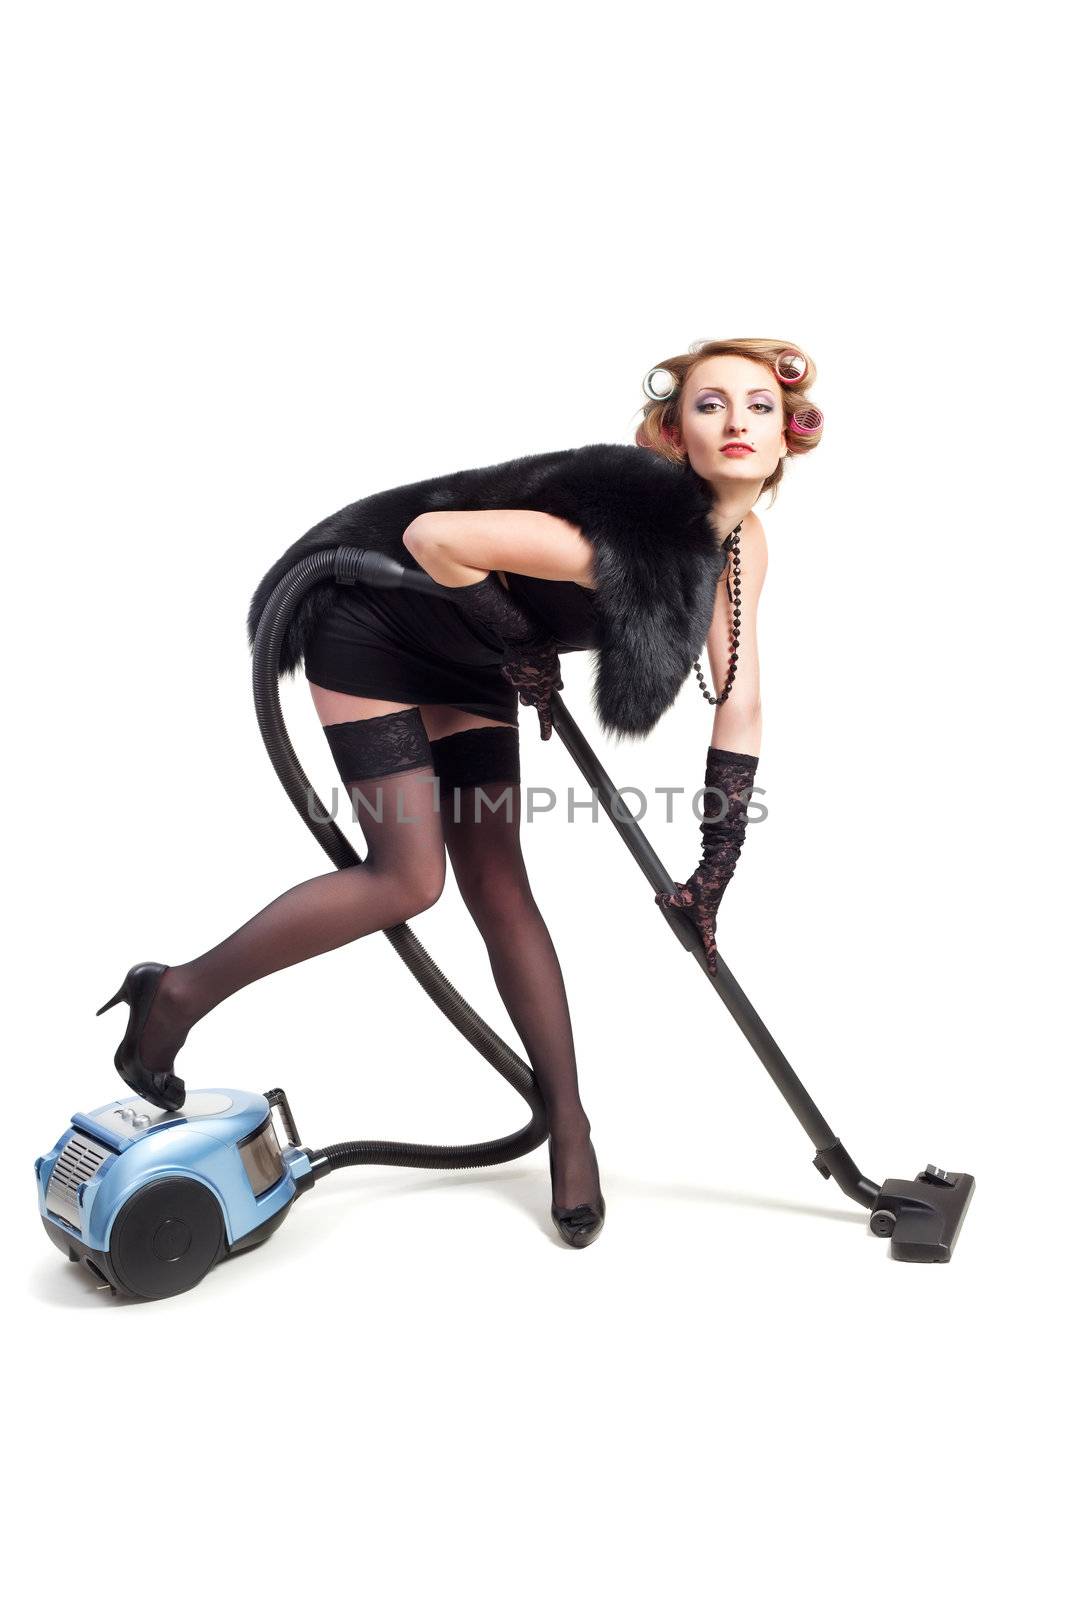 Girl with vacuum cleaner by igor_stramyk